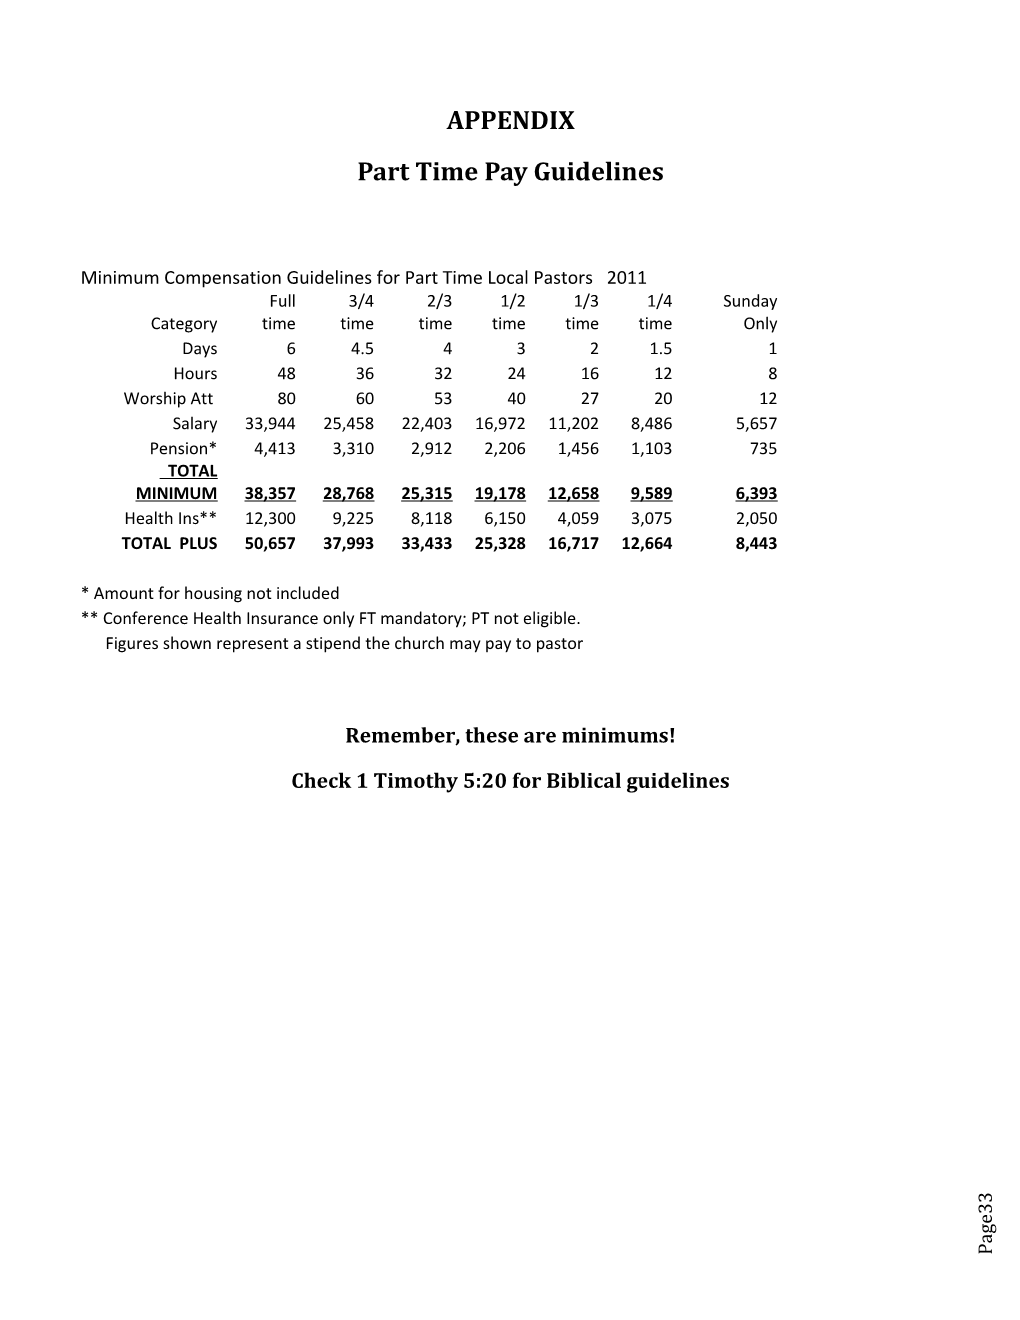 Part Time Pay Guidelines